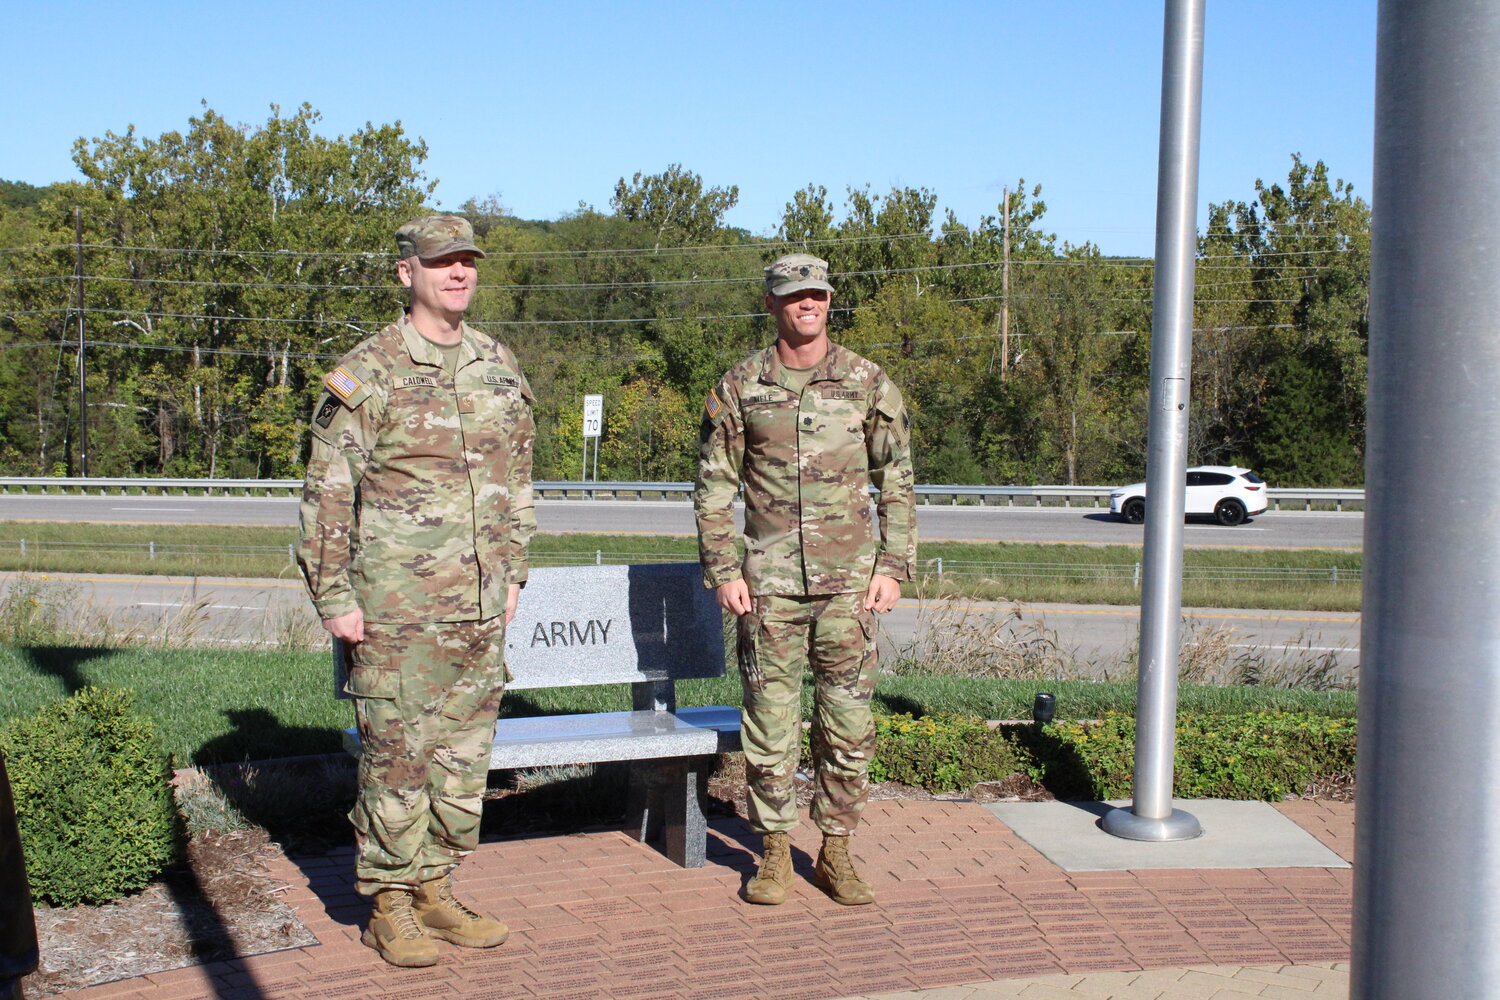 Lt. Col. Joseph Caldwell and Lt. Col. Tyson Mele stand in front of the U.S. Army bench at the Tribute to Veterans Memorial in Warrenton on Oct. 7.